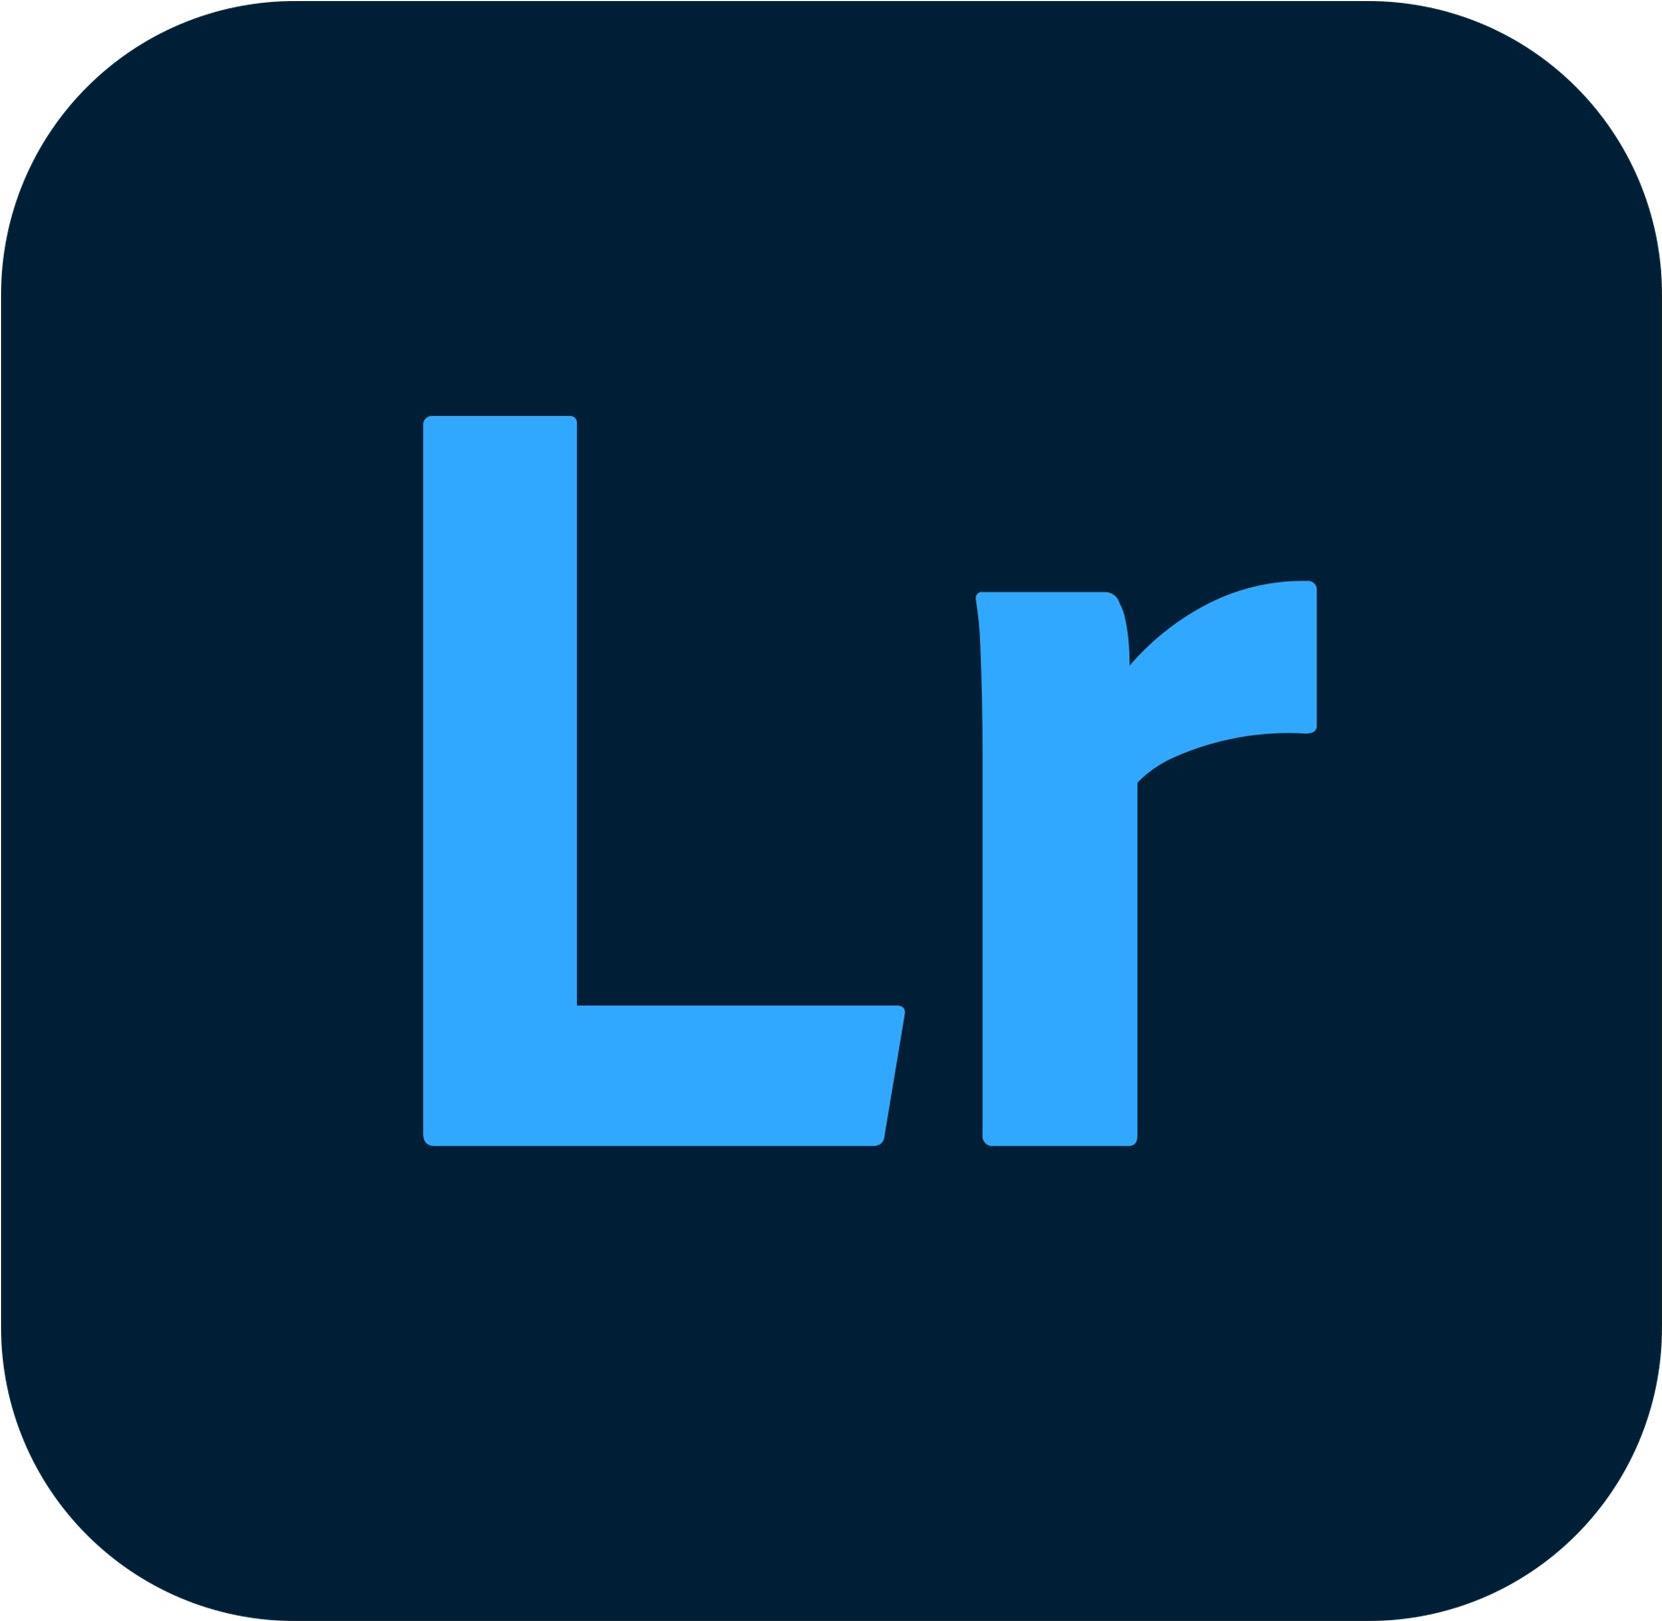 Adobe Lightroom Pro for teams - Subscription Renewal - 1 Benutzer - VIP Select - Stufe 14 (100+) - 3 years commitment, Introductory Full Year Forecast - Win, Mac - EU English von Adobe